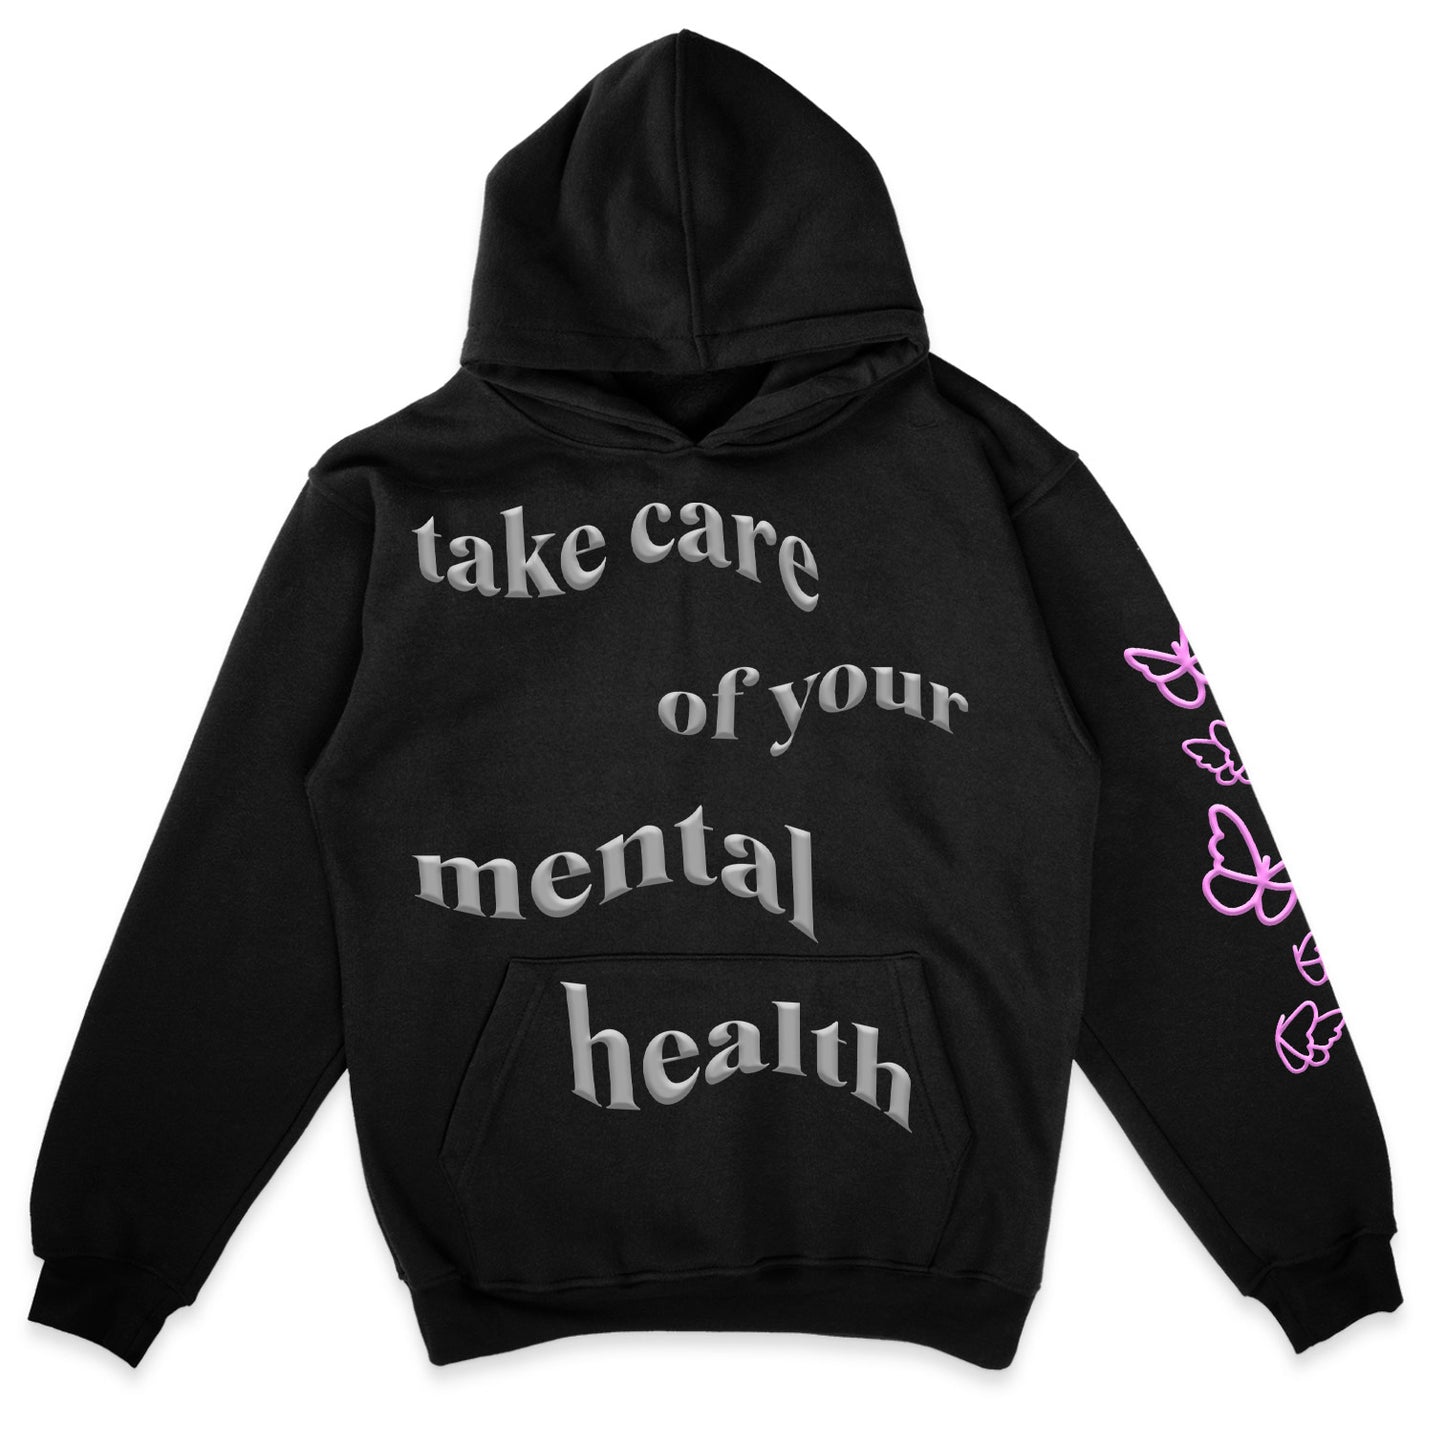 Take Care of Your Mental Health Heavyweight Hoodie - Black